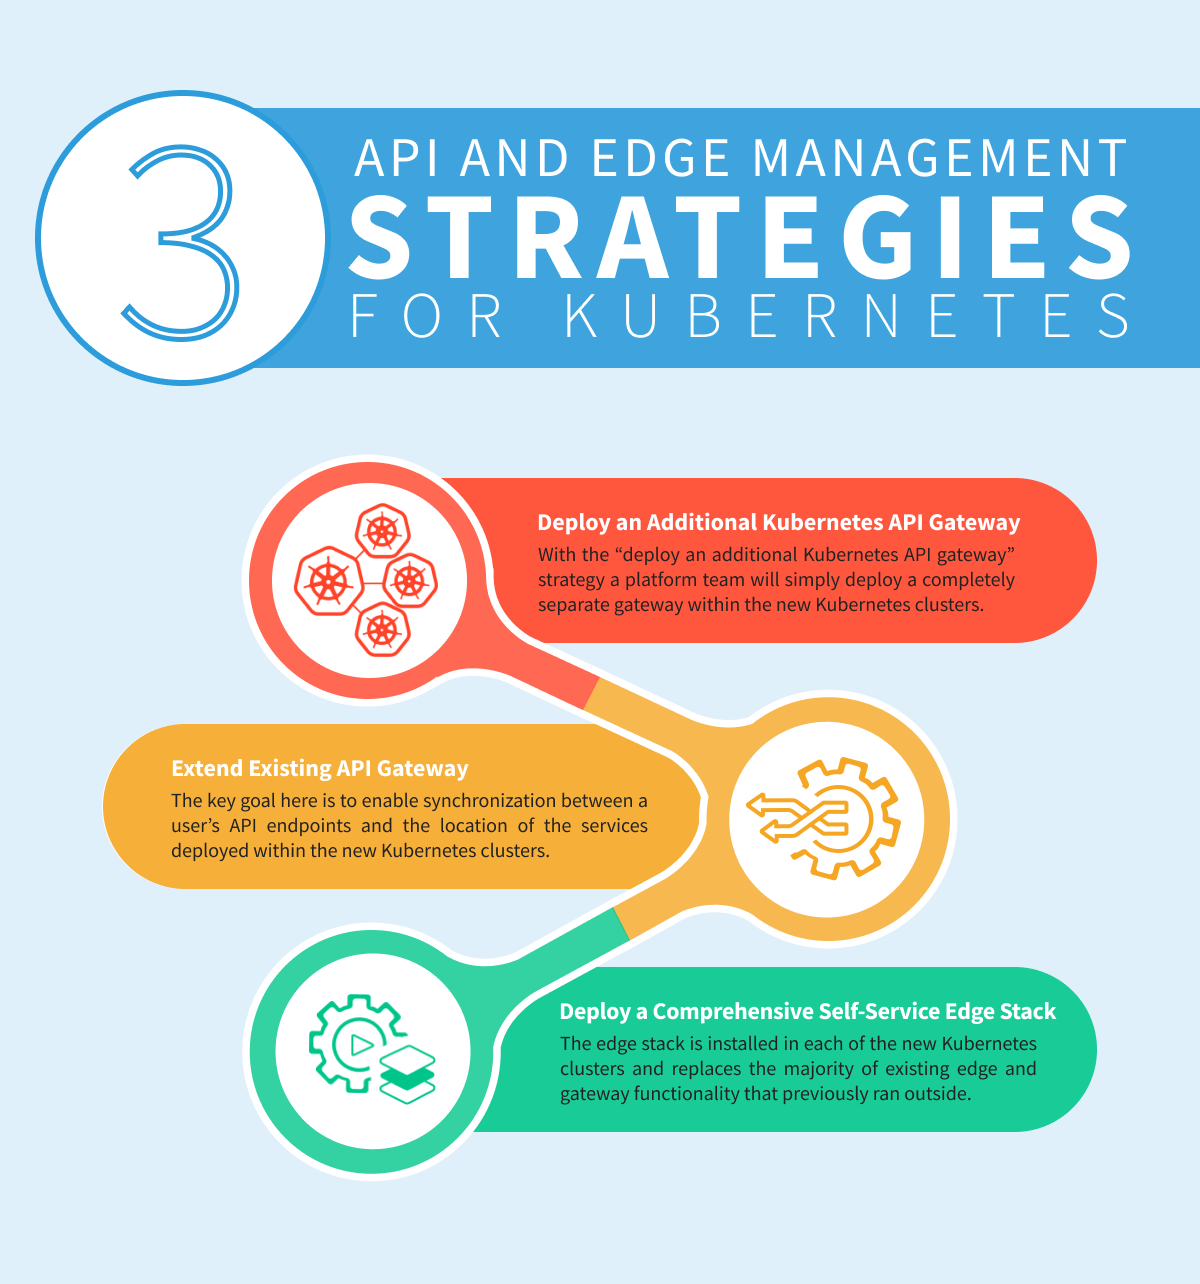 Diagram with 3 strategies for API and Edge management for Kubernetes